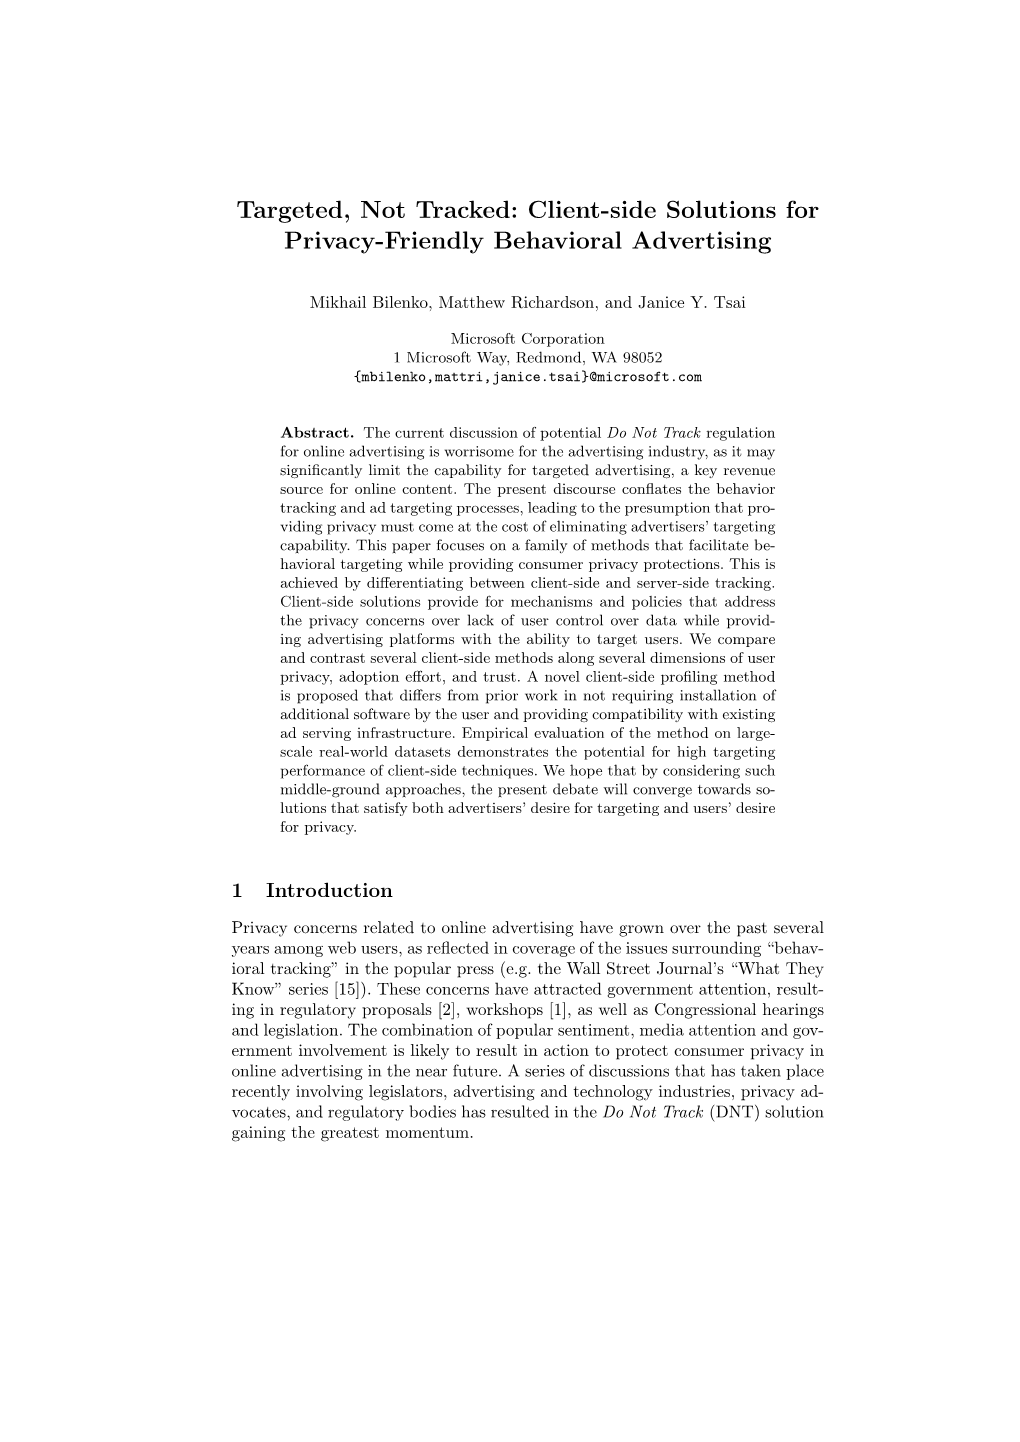 Client-Side Solutions for Privacy-Friendly Behavioral Advertising